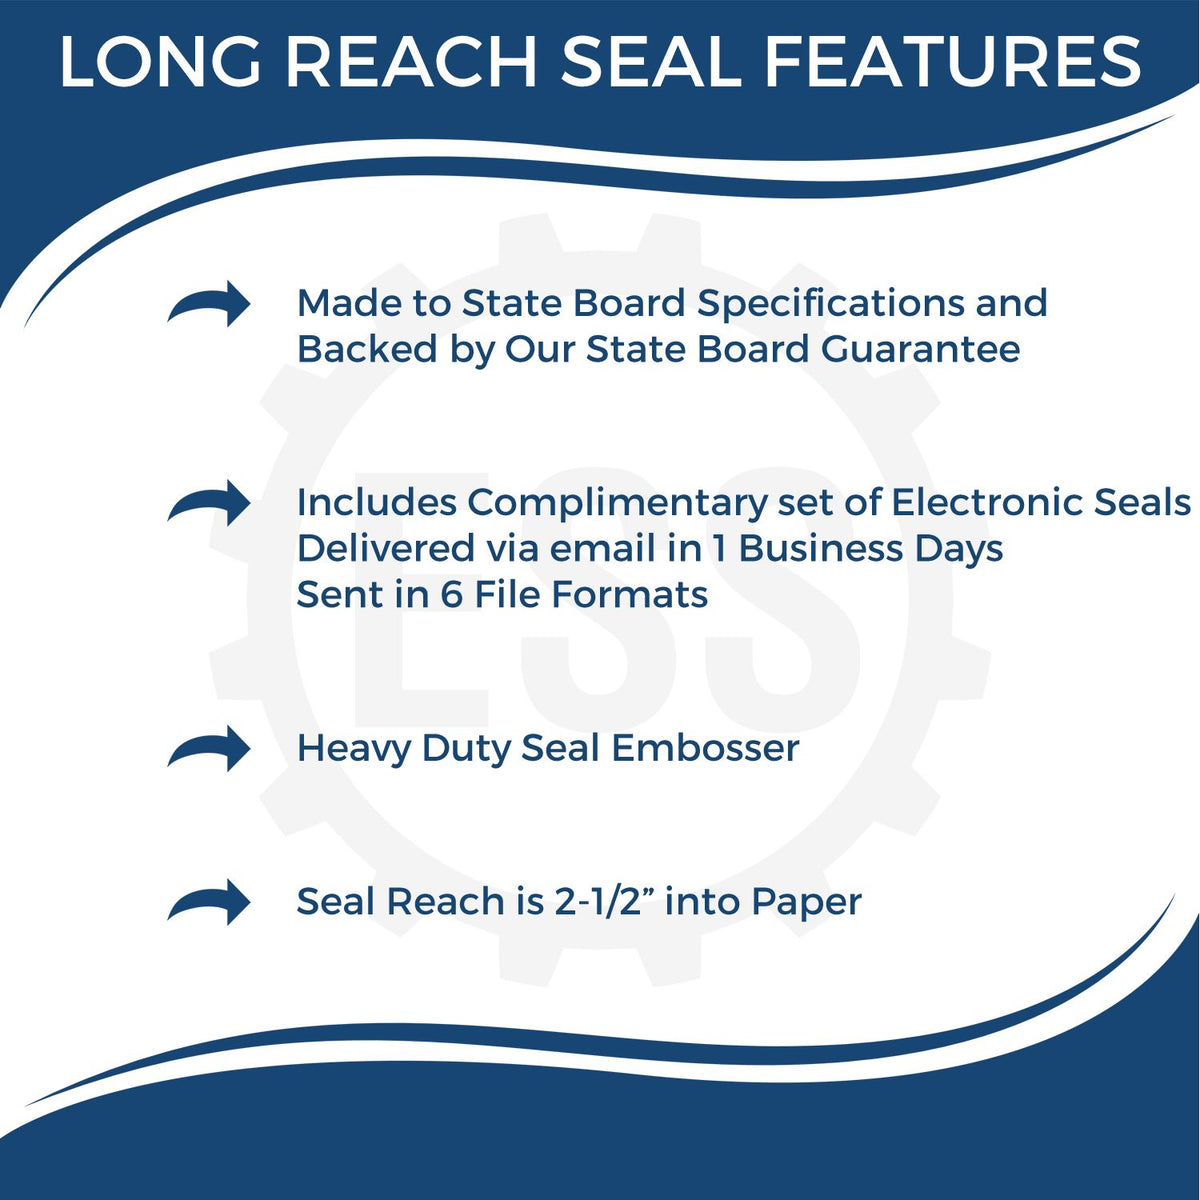 A picture of an infographic highlighting the selling points for the Long Reach Kentucky Land Surveyor Seal